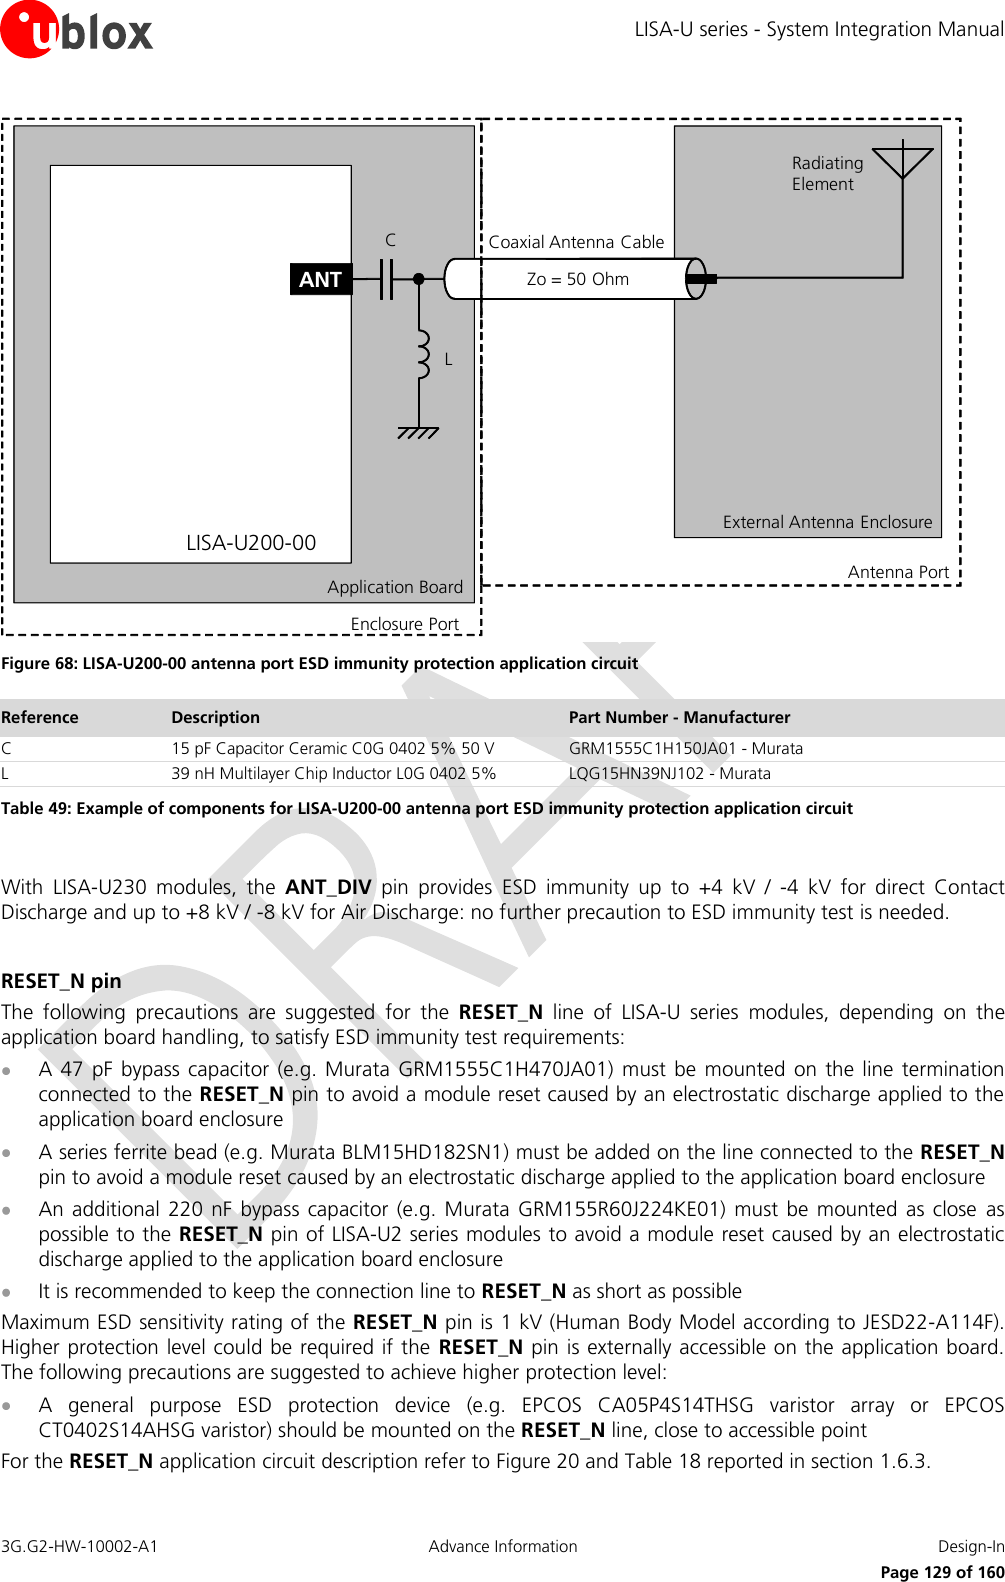 LISA-U series - System Integration Manual 3G.G2-HW-10002-A1  Advance Information  Design-In      Page 129 of 160 External Antenna EnclosureApplication BoardLISA-U200-00ANTRadiating ElementZo = 50 OhmCoaxial Antenna CableAntenna PortEnclosure PortCL Figure 68: LISA-U200-00 antenna port ESD immunity protection application circuit Reference Description Part Number - Manufacturer C 15 pF Capacitor Ceramic C0G 0402 5% 50 V GRM1555C1H150JA01 - Murata L 39 nH Multilayer Chip Inductor L0G 0402 5% LQG15HN39NJ102 - Murata Table 49: Example of components for LISA-U200-00 antenna port ESD immunity protection application circuit  With  LISA-U230  modules,  the  ANT_DIV  pin  provides  ESD  immunity  up  to  +4  kV  /  -4  kV  for  direct  Contact Discharge and up to +8 kV / -8 kV for Air Discharge: no further precaution to ESD immunity test is needed.  RESET_N pin The  following  precautions  are  suggested  for  the  RESET_N  line  of  LISA-U  series  modules,  depending  on  the application board handling, to satisfy ESD immunity test requirements:  A 47  pF bypass  capacitor  (e.g. Murata GRM1555C1H470JA01)  must  be mounted  on the  line termination connected to the RESET_N pin to avoid a module reset caused by an electrostatic discharge applied to the application board enclosure  A series ferrite bead (e.g. Murata BLM15HD182SN1) must be added on the line connected to the RESET_N pin to avoid a module reset caused by an electrostatic discharge applied to the application board enclosure  An additional 220  nF bypass capacitor  (e.g. Murata  GRM155R60J224KE01)  must be mounted as  close  as possible to the RESET_N pin of LISA-U2 series modules to avoid a module reset caused by an electrostatic discharge applied to the application board enclosure  It is recommended to keep the connection line to RESET_N as short as possible Maximum ESD sensitivity rating of the RESET_N pin is 1 kV (Human Body Model according to JESD22-A114F). Higher protection level could be required if the  RESET_N pin is externally accessible on the application board. The following precautions are suggested to achieve higher protection level:  A  general  purpose  ESD  protection  device  (e.g.  EPCOS  CA05P4S14THSG  varistor  array  or  EPCOS CT0402S14AHSG varistor) should be mounted on the RESET_N line, close to accessible point For the RESET_N application circuit description refer to Figure 20 and Table 18 reported in section 1.6.3. 